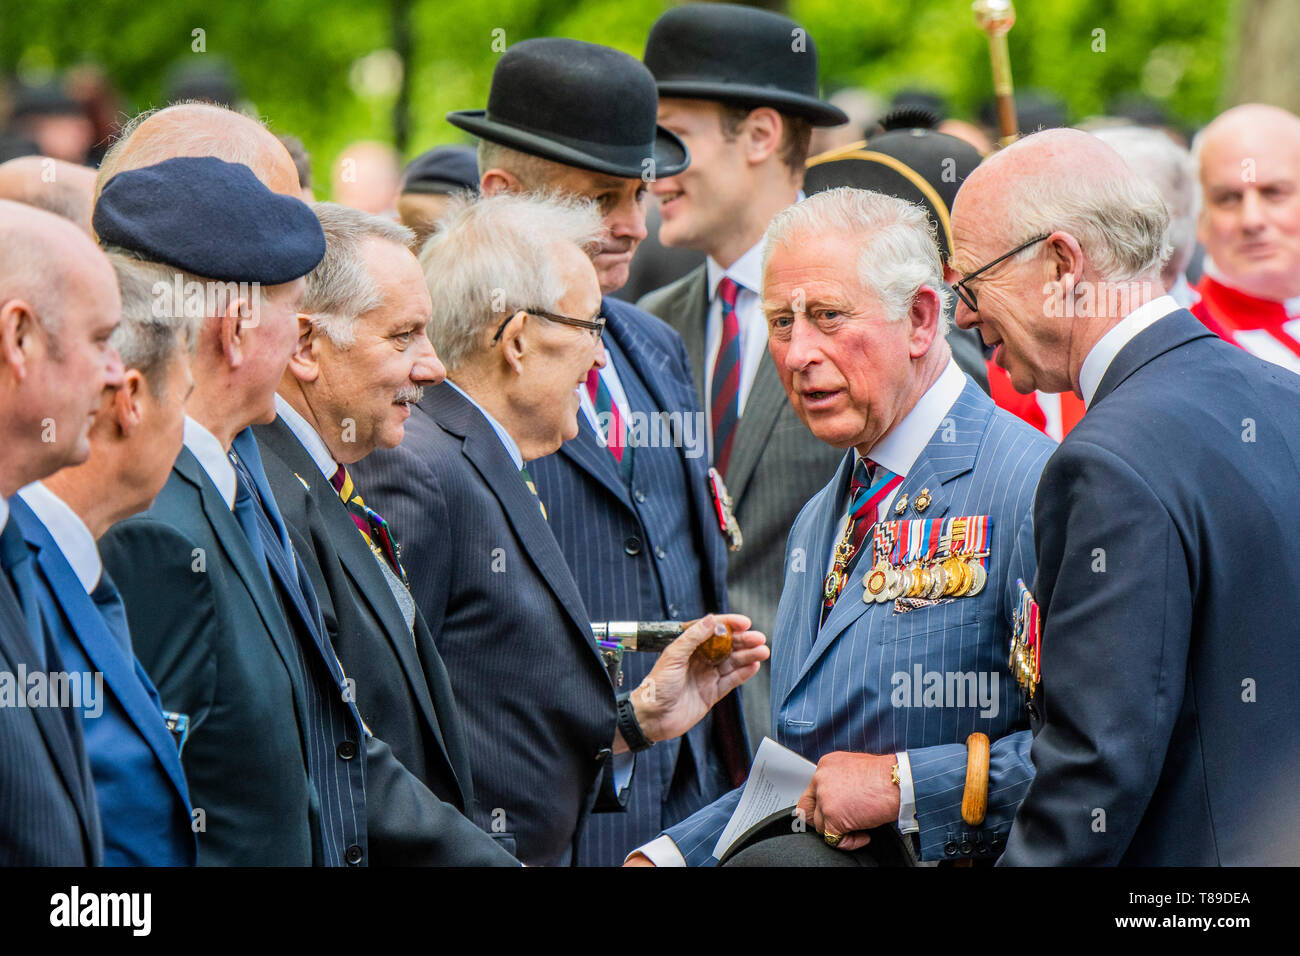 London, UK. 12th May, 2019. His Royal Highness The Prince of Wales, Field Marshal, Colonel in Chief 1ST The Queen’s Dragoon Guards, takes the salute at the Annual Parade and Service of The Combined Cavalry Old Comrades Association at the Cavalry Memorial adjacent to the Bandstand in Hyde Park. It is 95 years on from the unveiling and dedication of its memorial in Hyde Park. Credit: Guy Bell/Alamy Live News Stock Photo